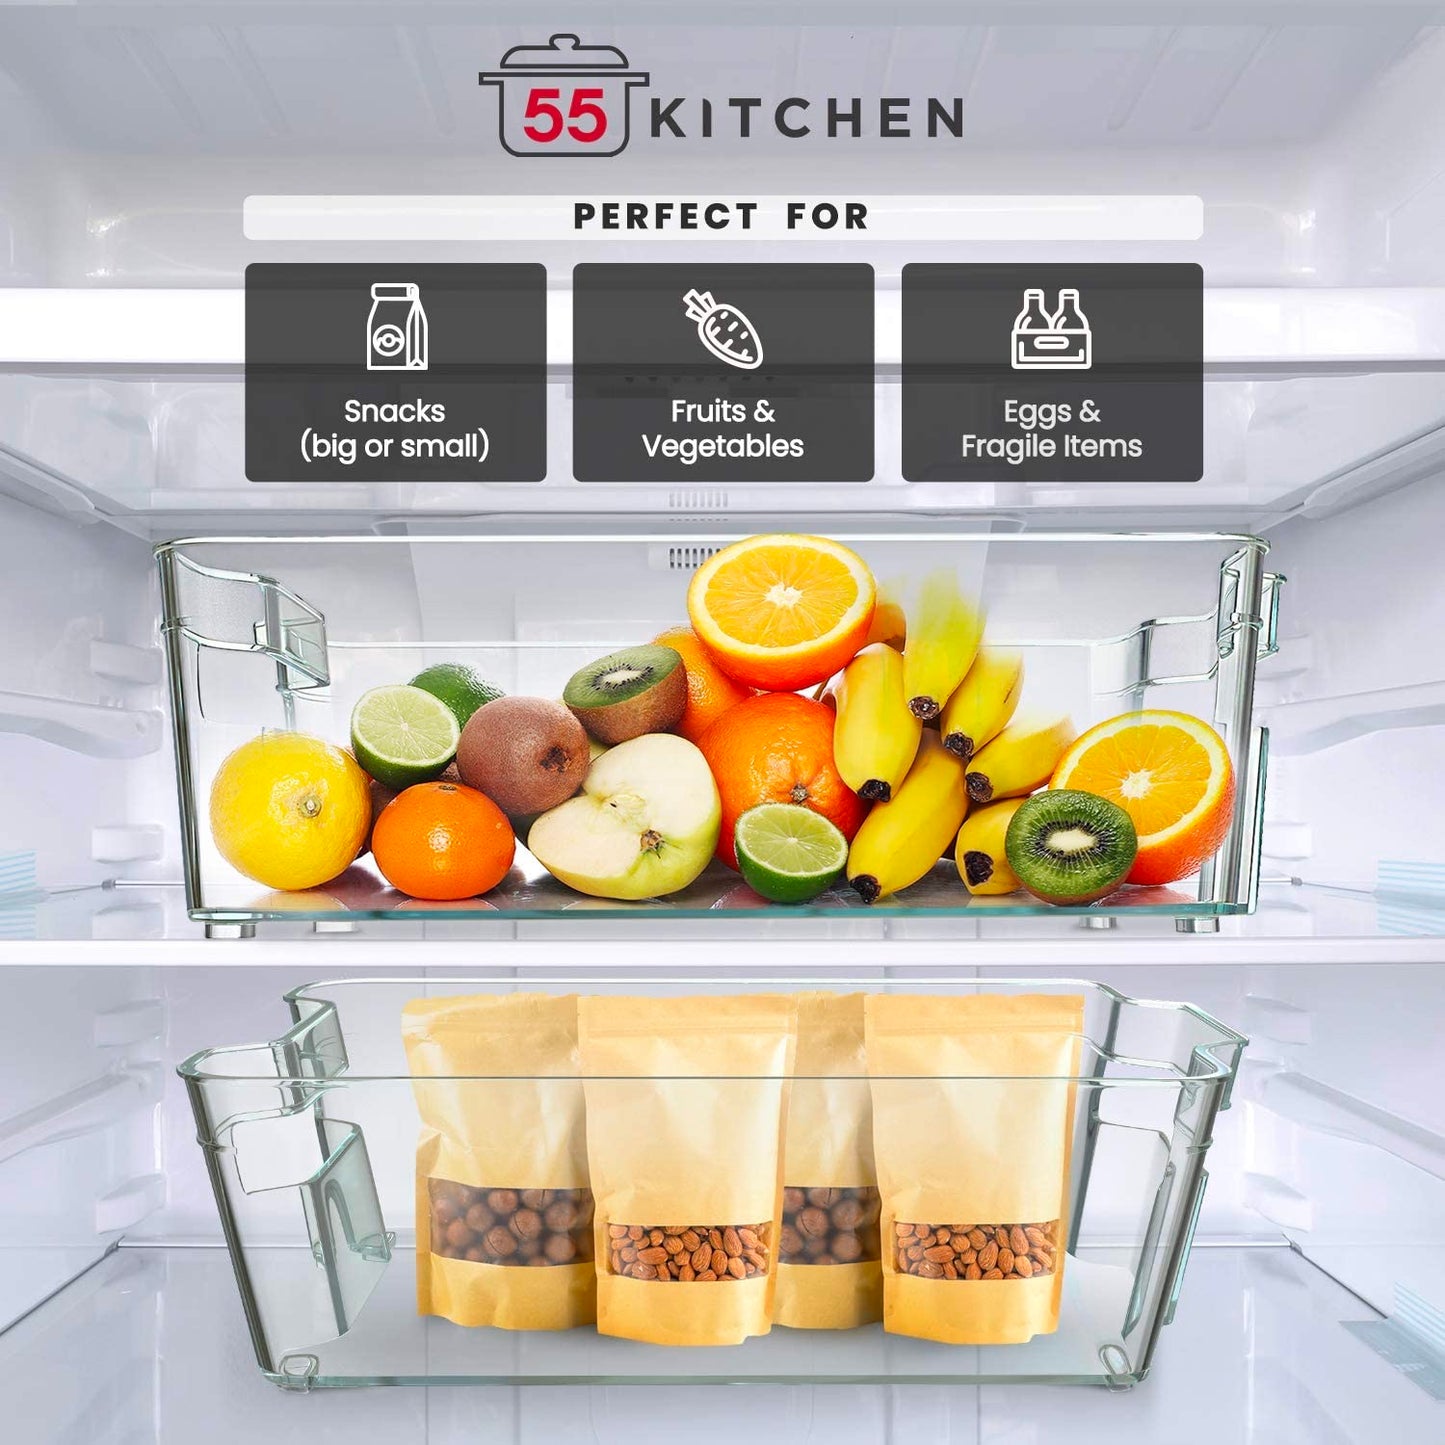 stackable fridge bins pictured in the refrigerator. perfect for snacks, fruits and veggies and fragile items